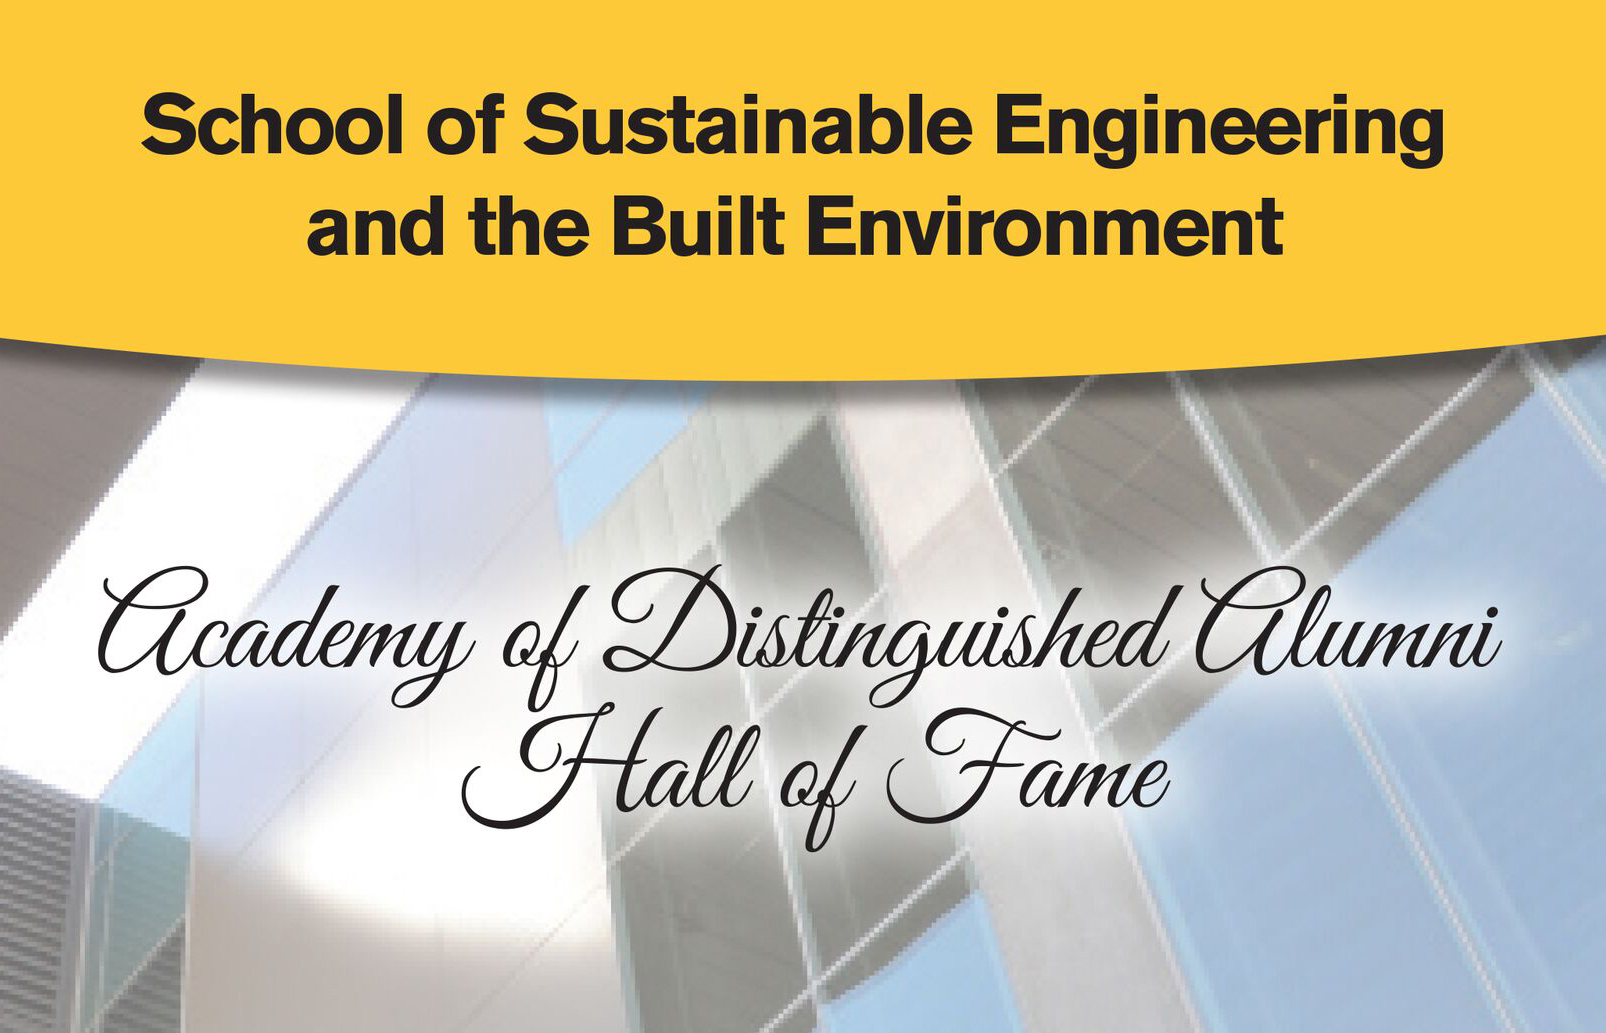 School of Sustainable Engineering and the Built Environment's  Academy of Distinguished Alumni Hall of Fame